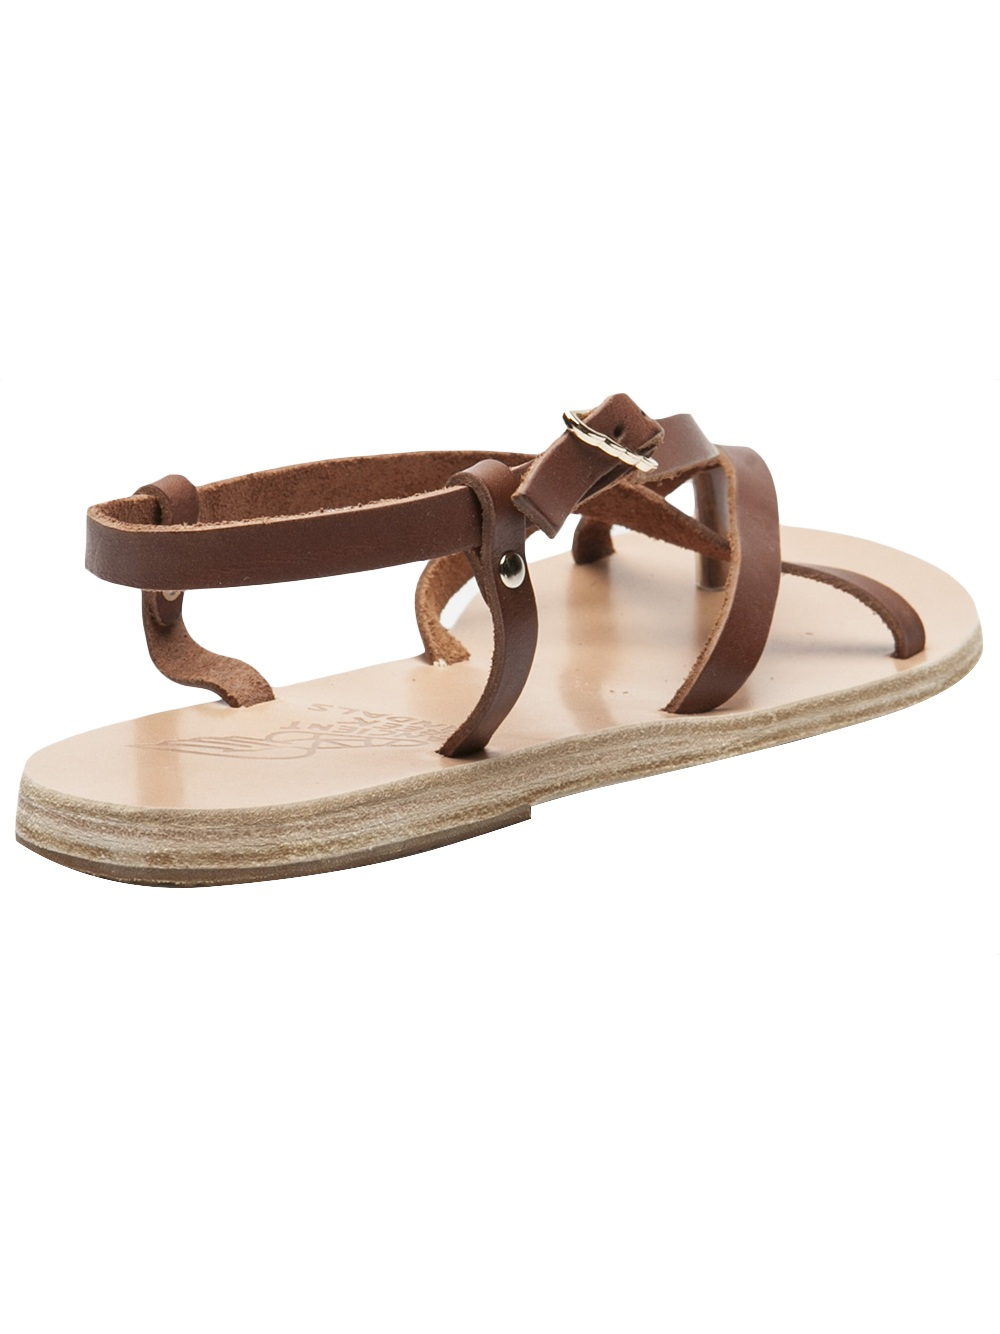 Lyst - Ancient greek sandals Semele Leather Sandals in Brown